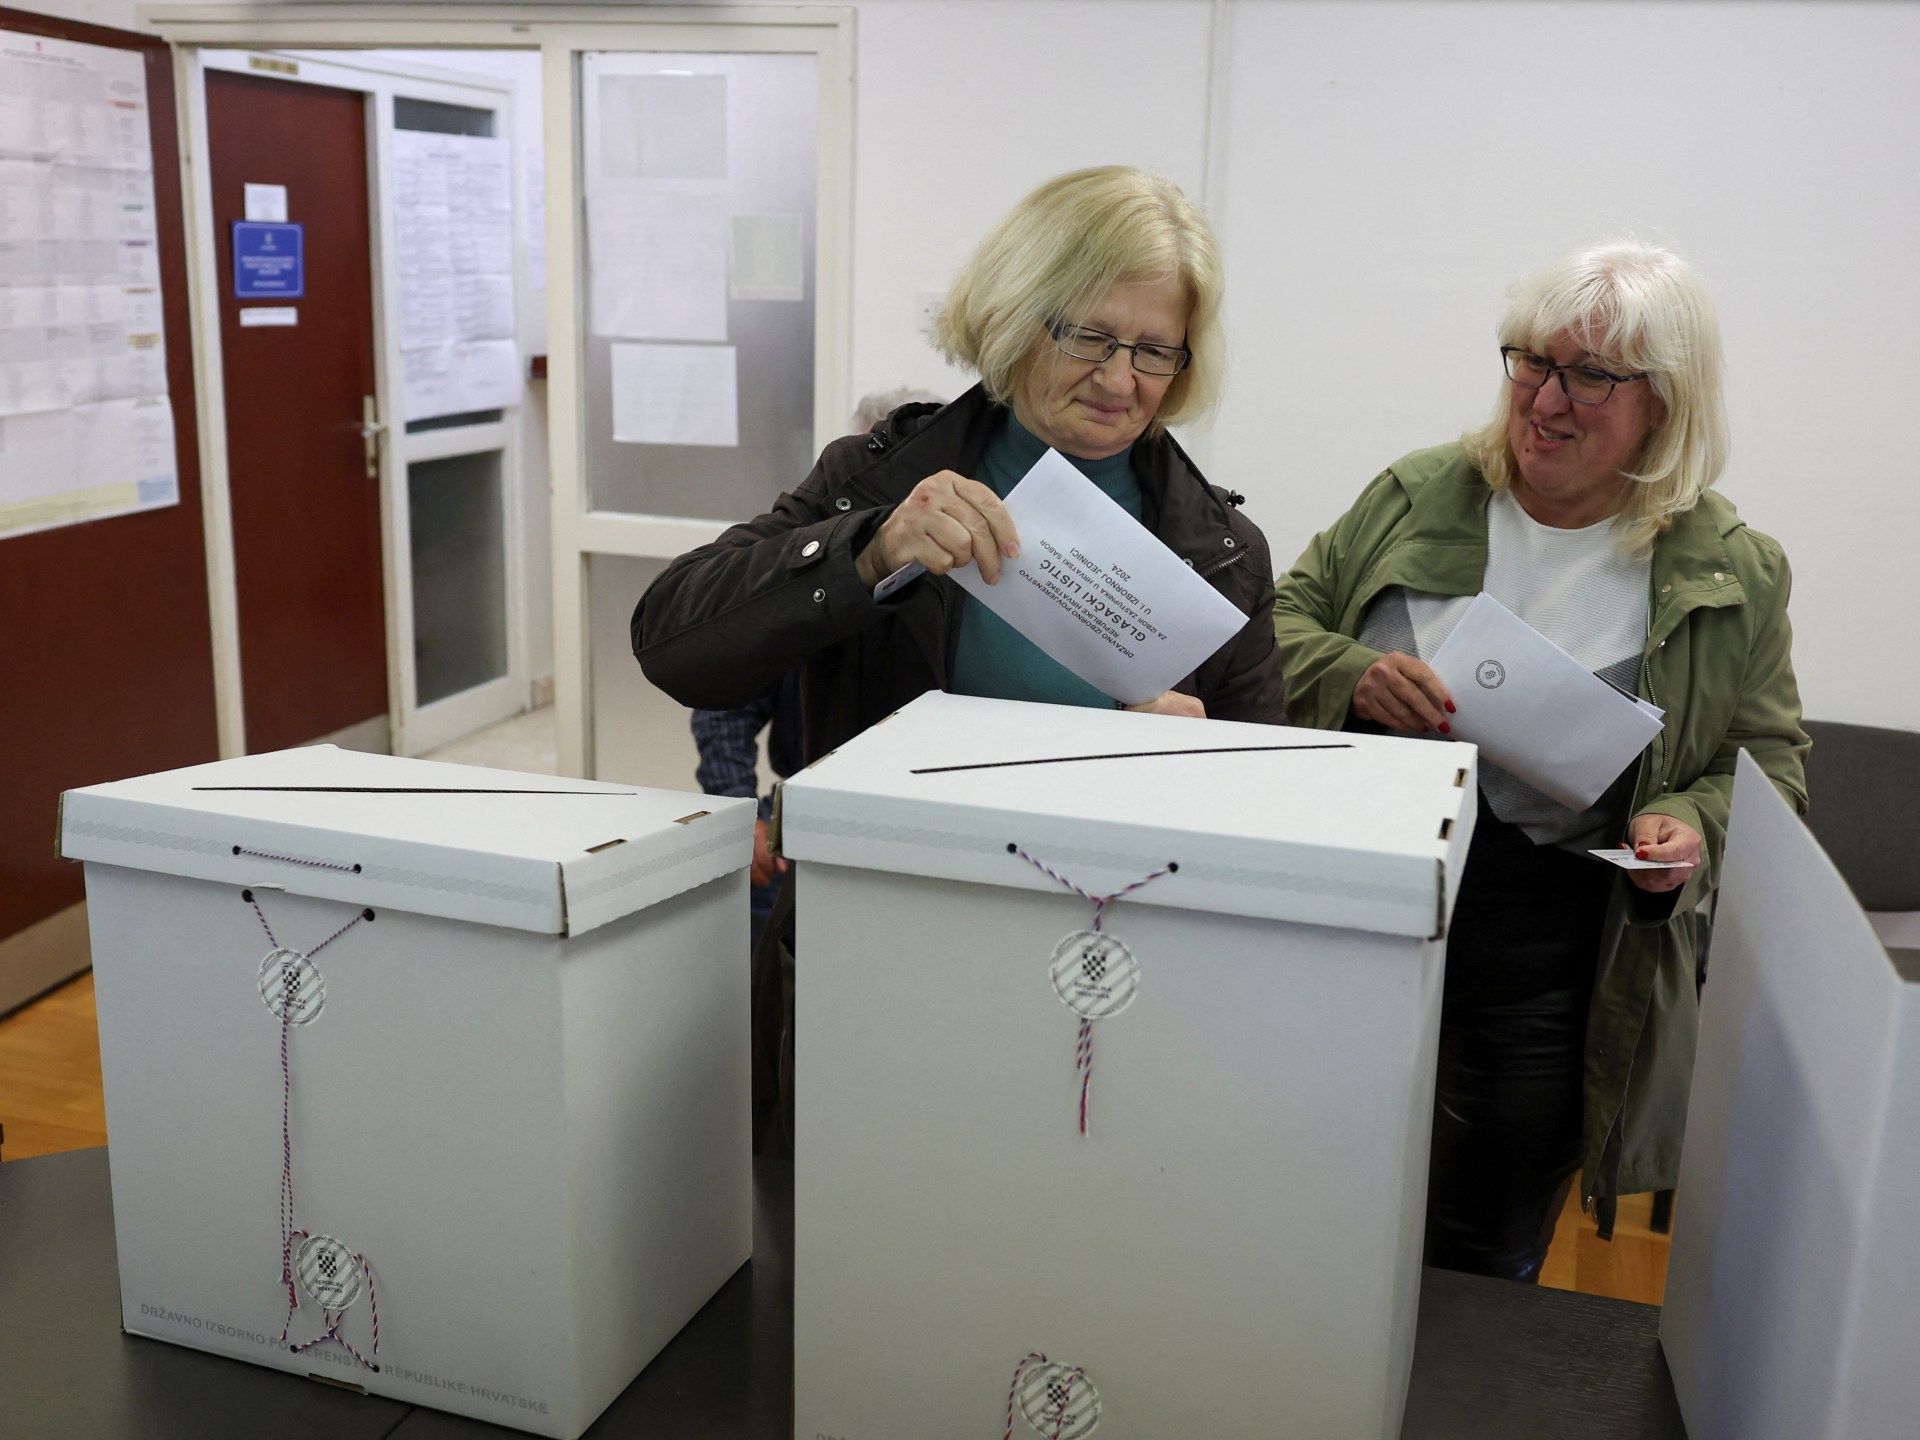 Croatia ruling party heading for election win without majority: Exit poll | Elections News